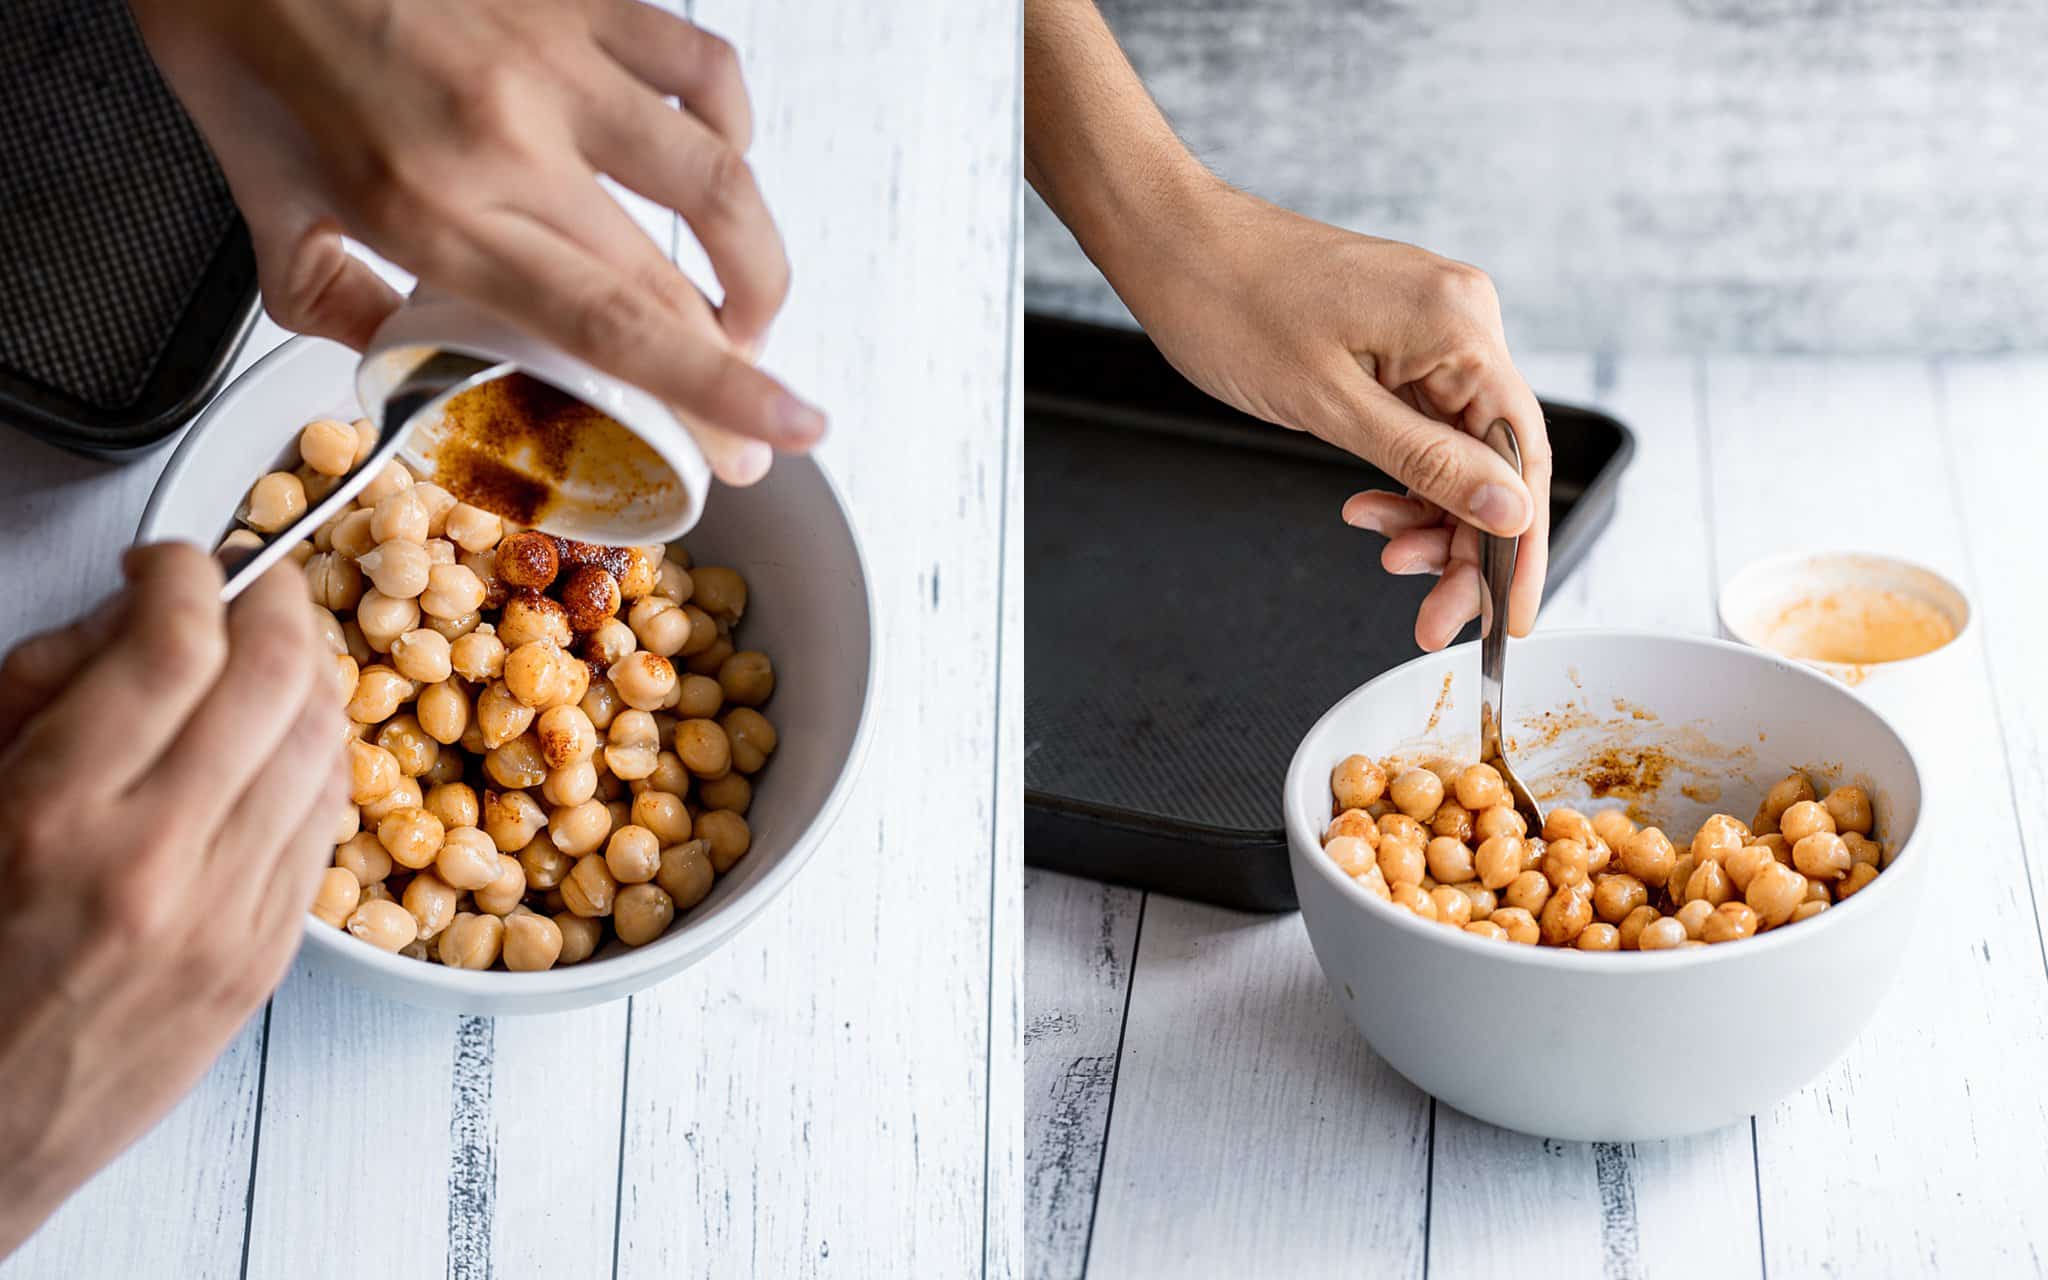 How to Make the Best Spicy Roasted Chickpeas Recipes